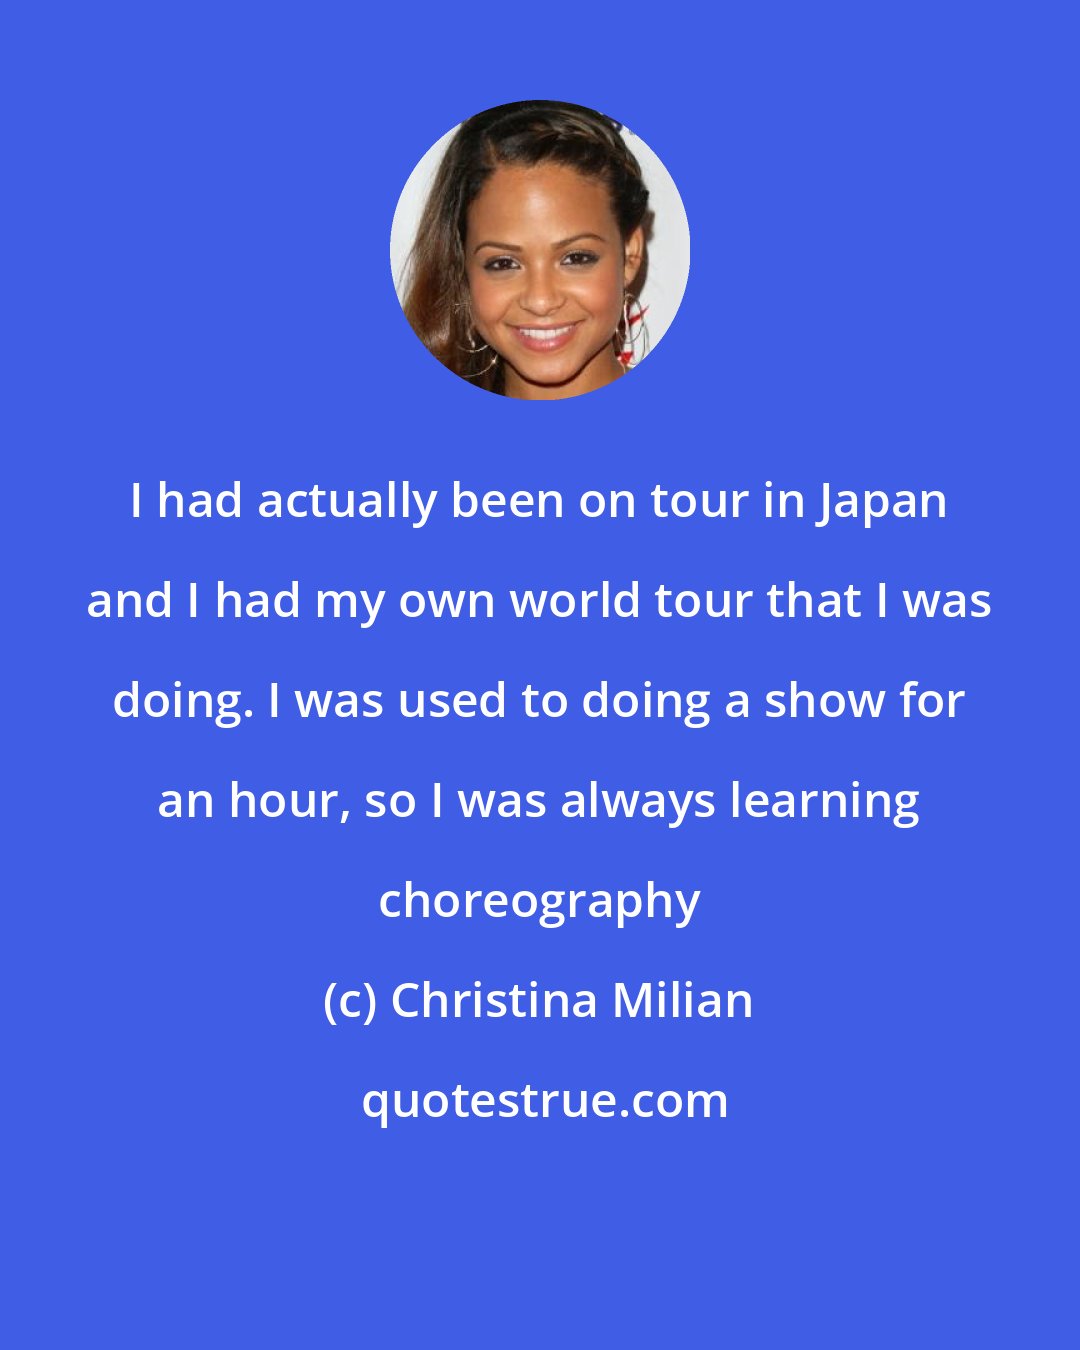 Christina Milian: I had actually been on tour in Japan and I had my own world tour that I was doing. I was used to doing a show for an hour, so I was always learning choreography